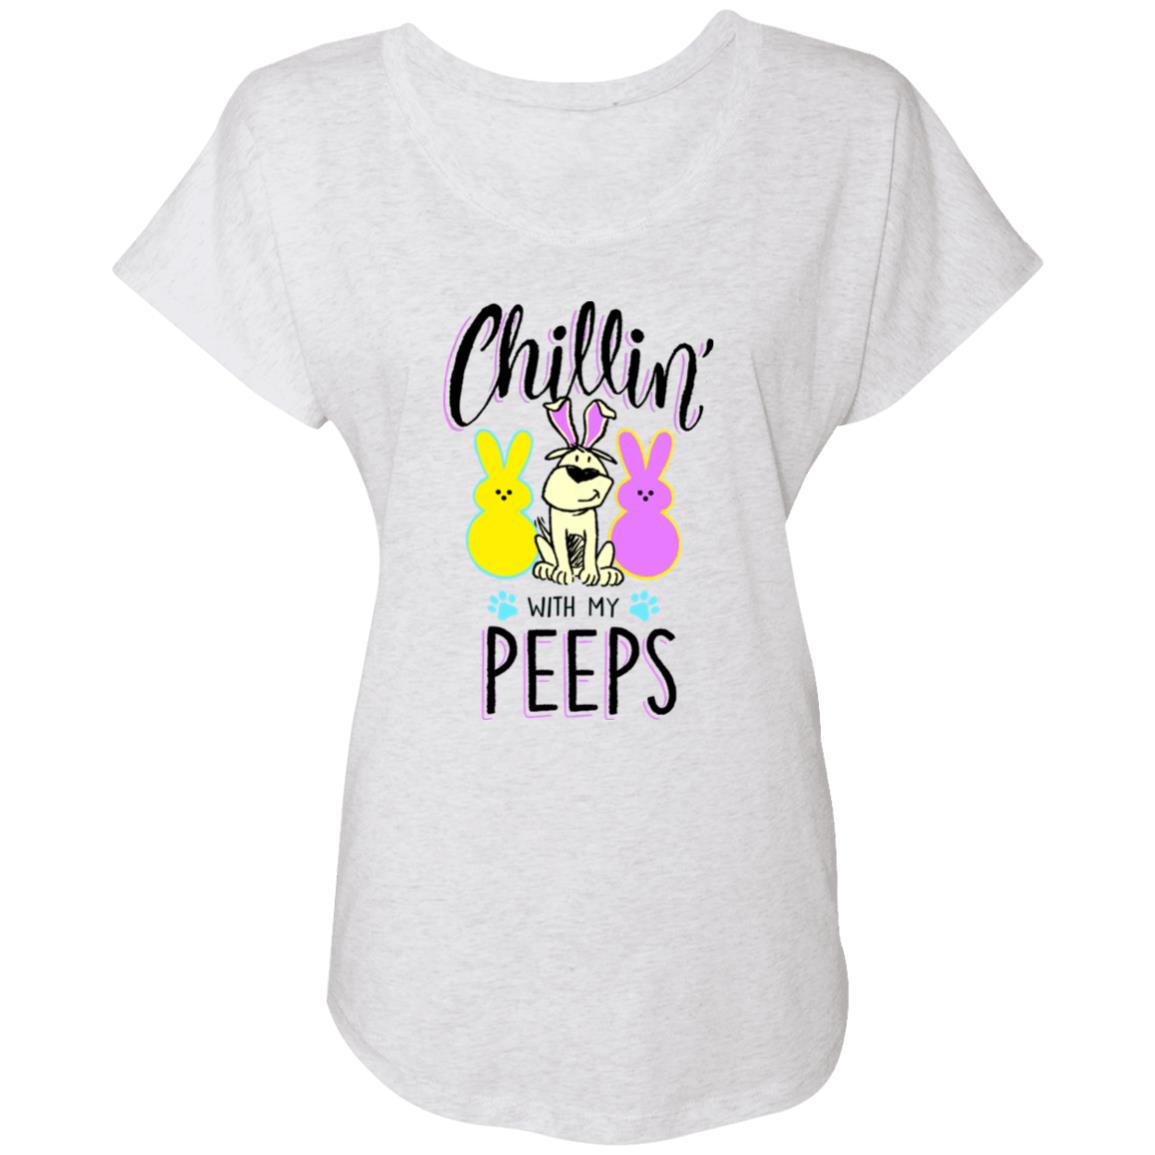 Image of Chilln’ With My Peeps - &#x1f430; Slouchy Tee Heather White